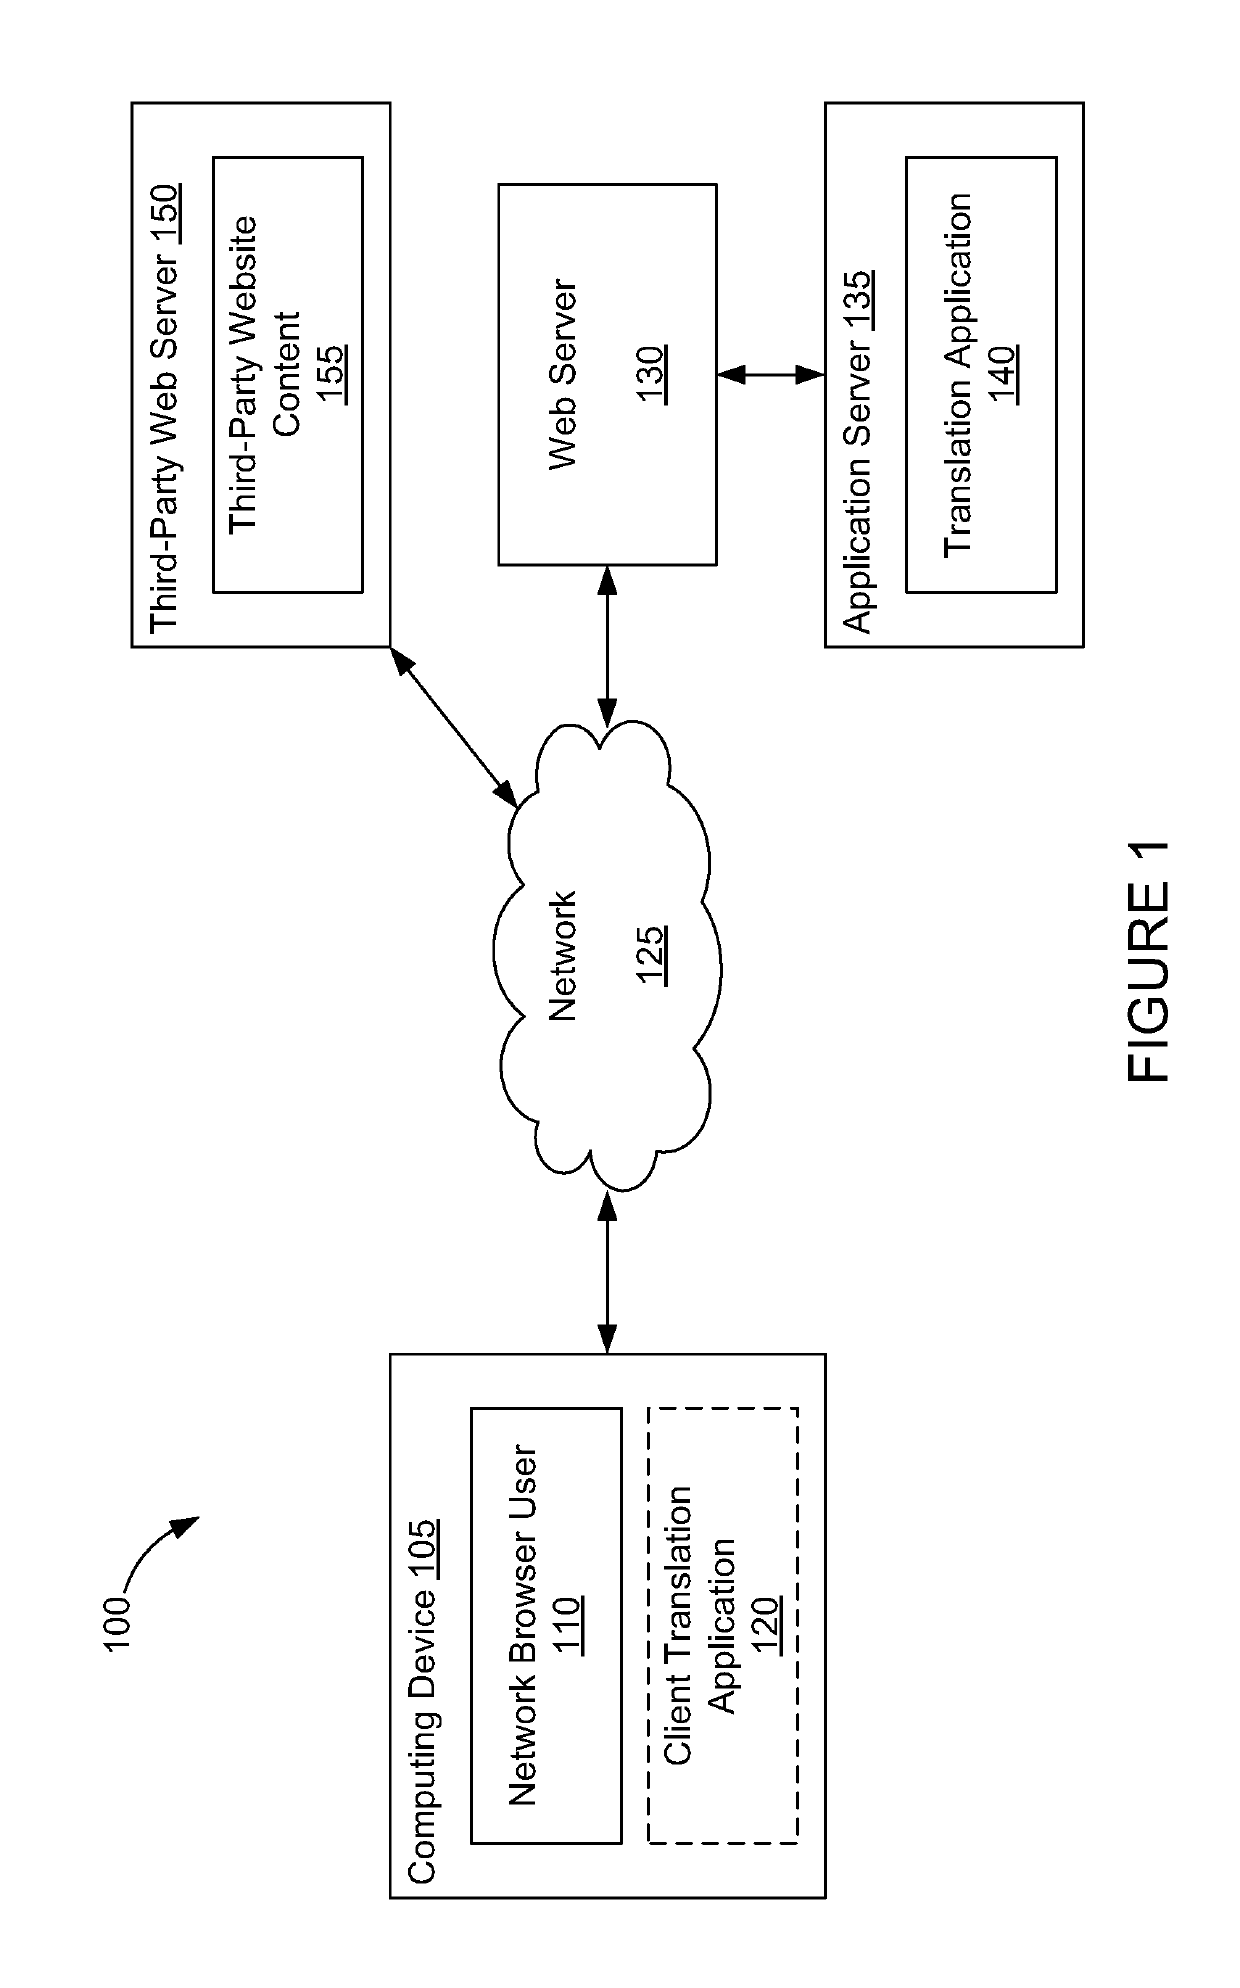 Systems and Methods for Translating Textual Content